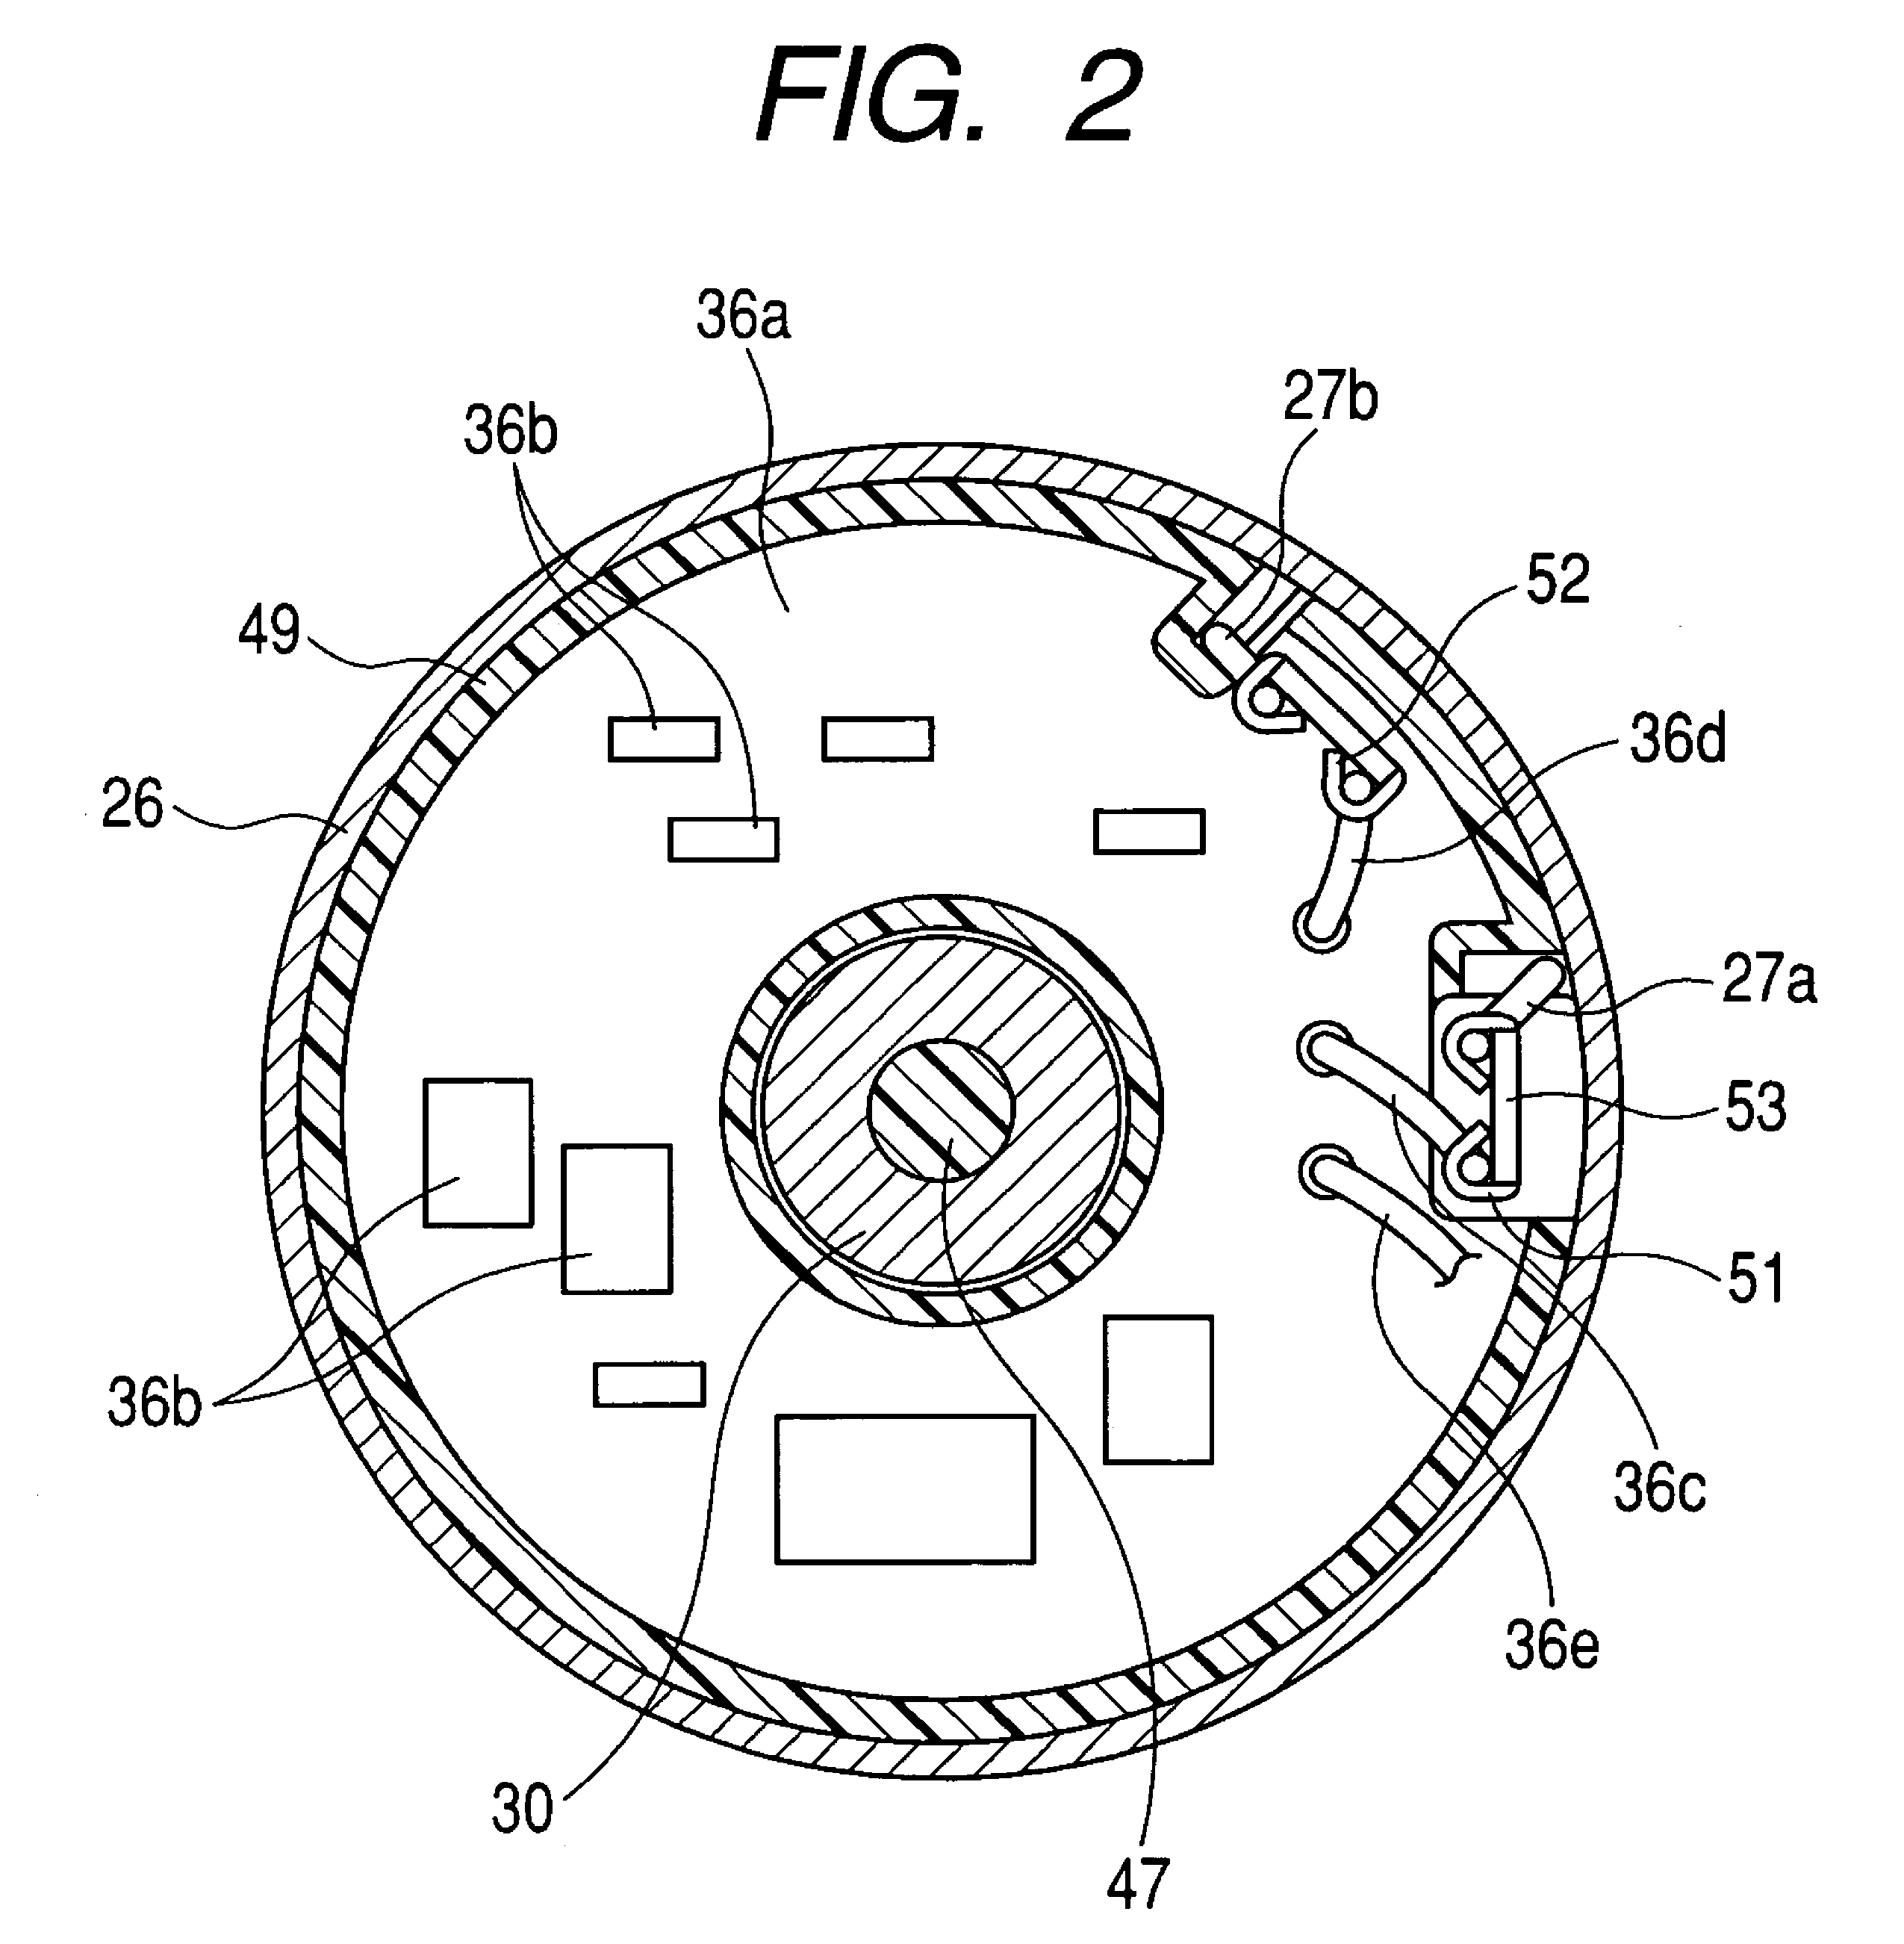 Electromagnetic switch equipped with built-in electronic control circuit